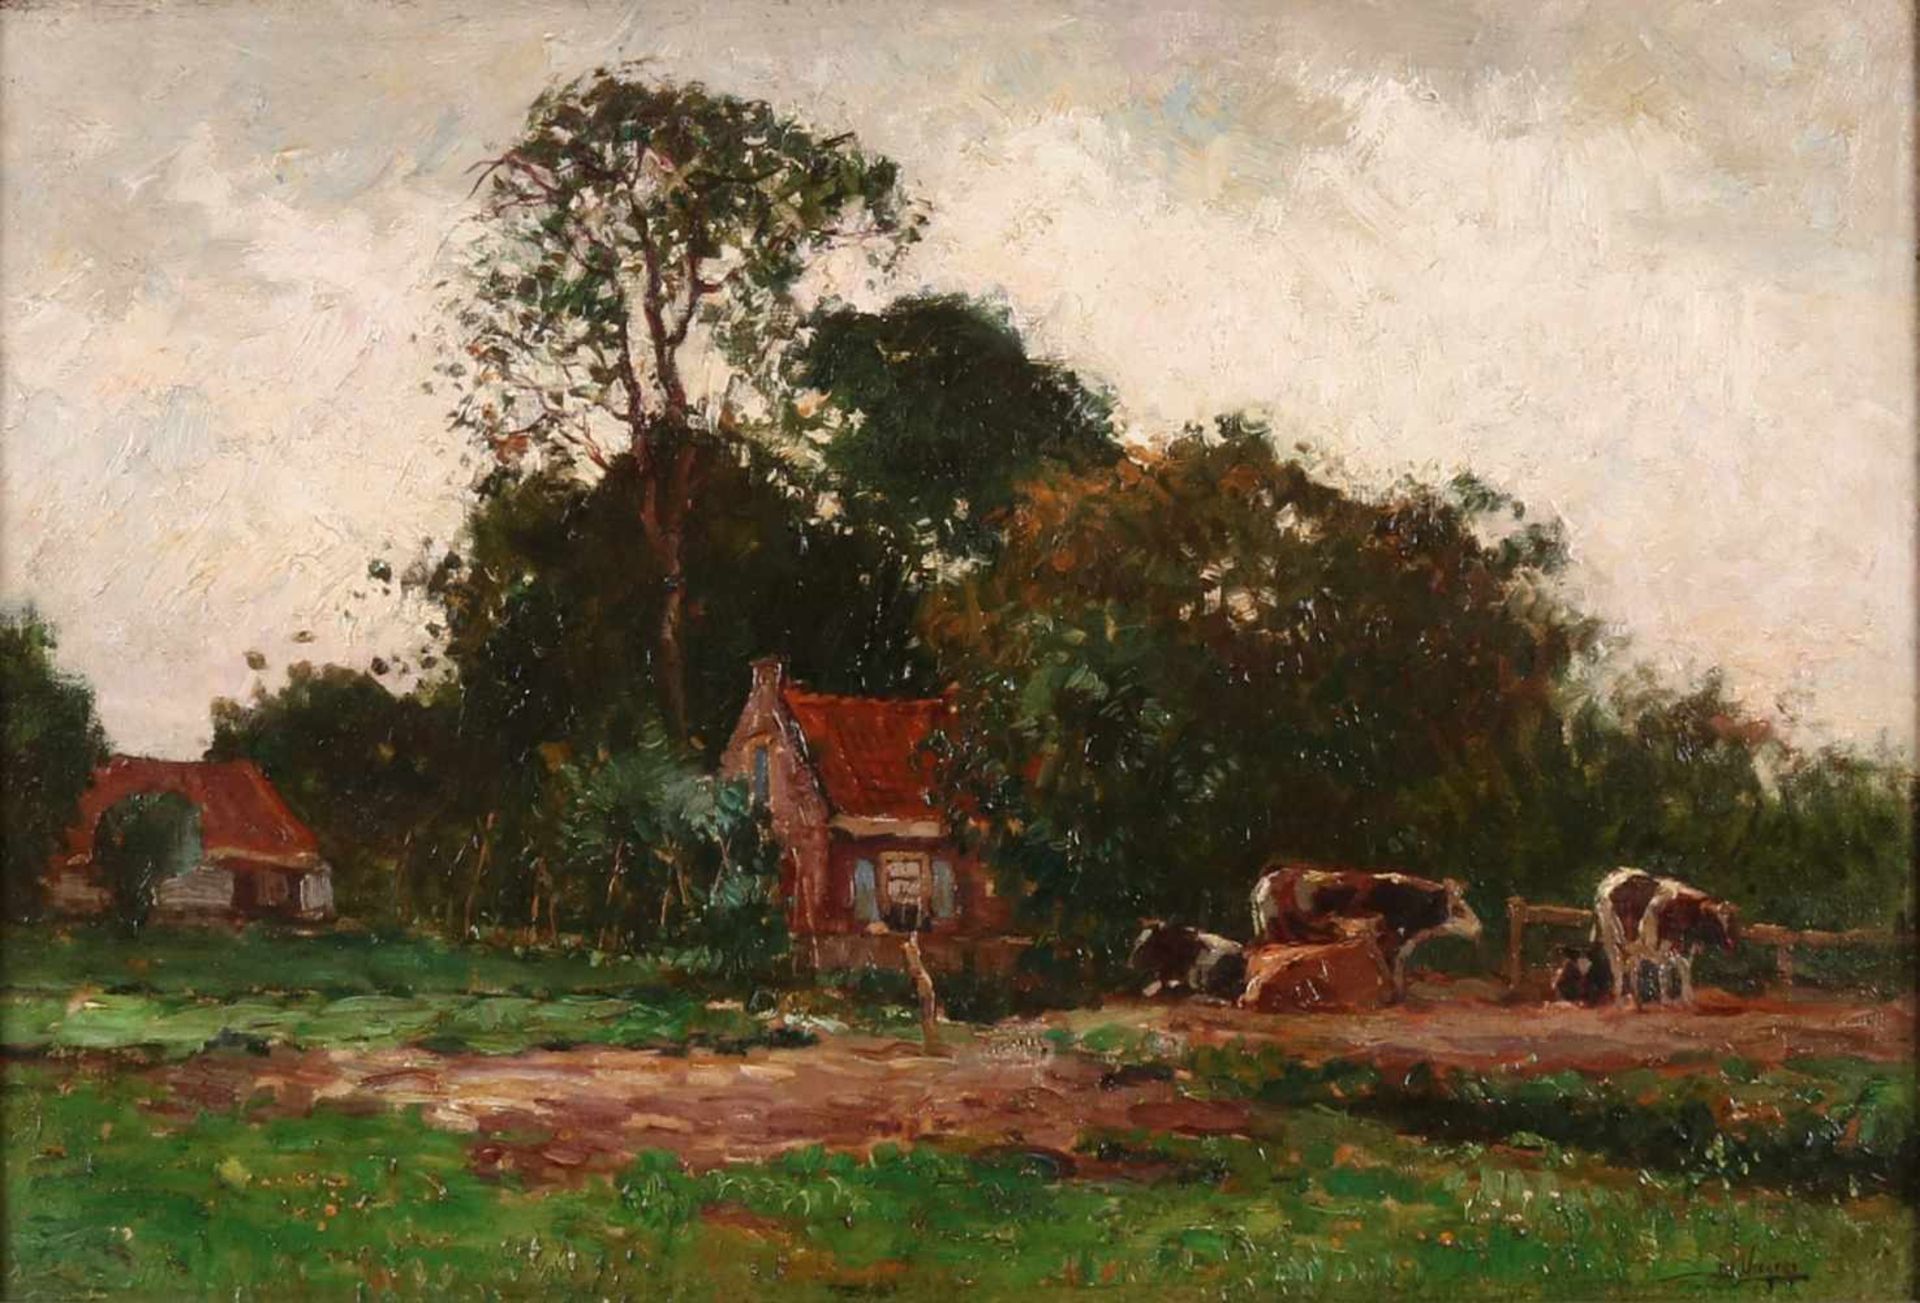 Ben Viegers. 1886 - 1947. Farm with cows. Damages. Oil on linen. Size: 40 x H, B 60 cm. In fair /